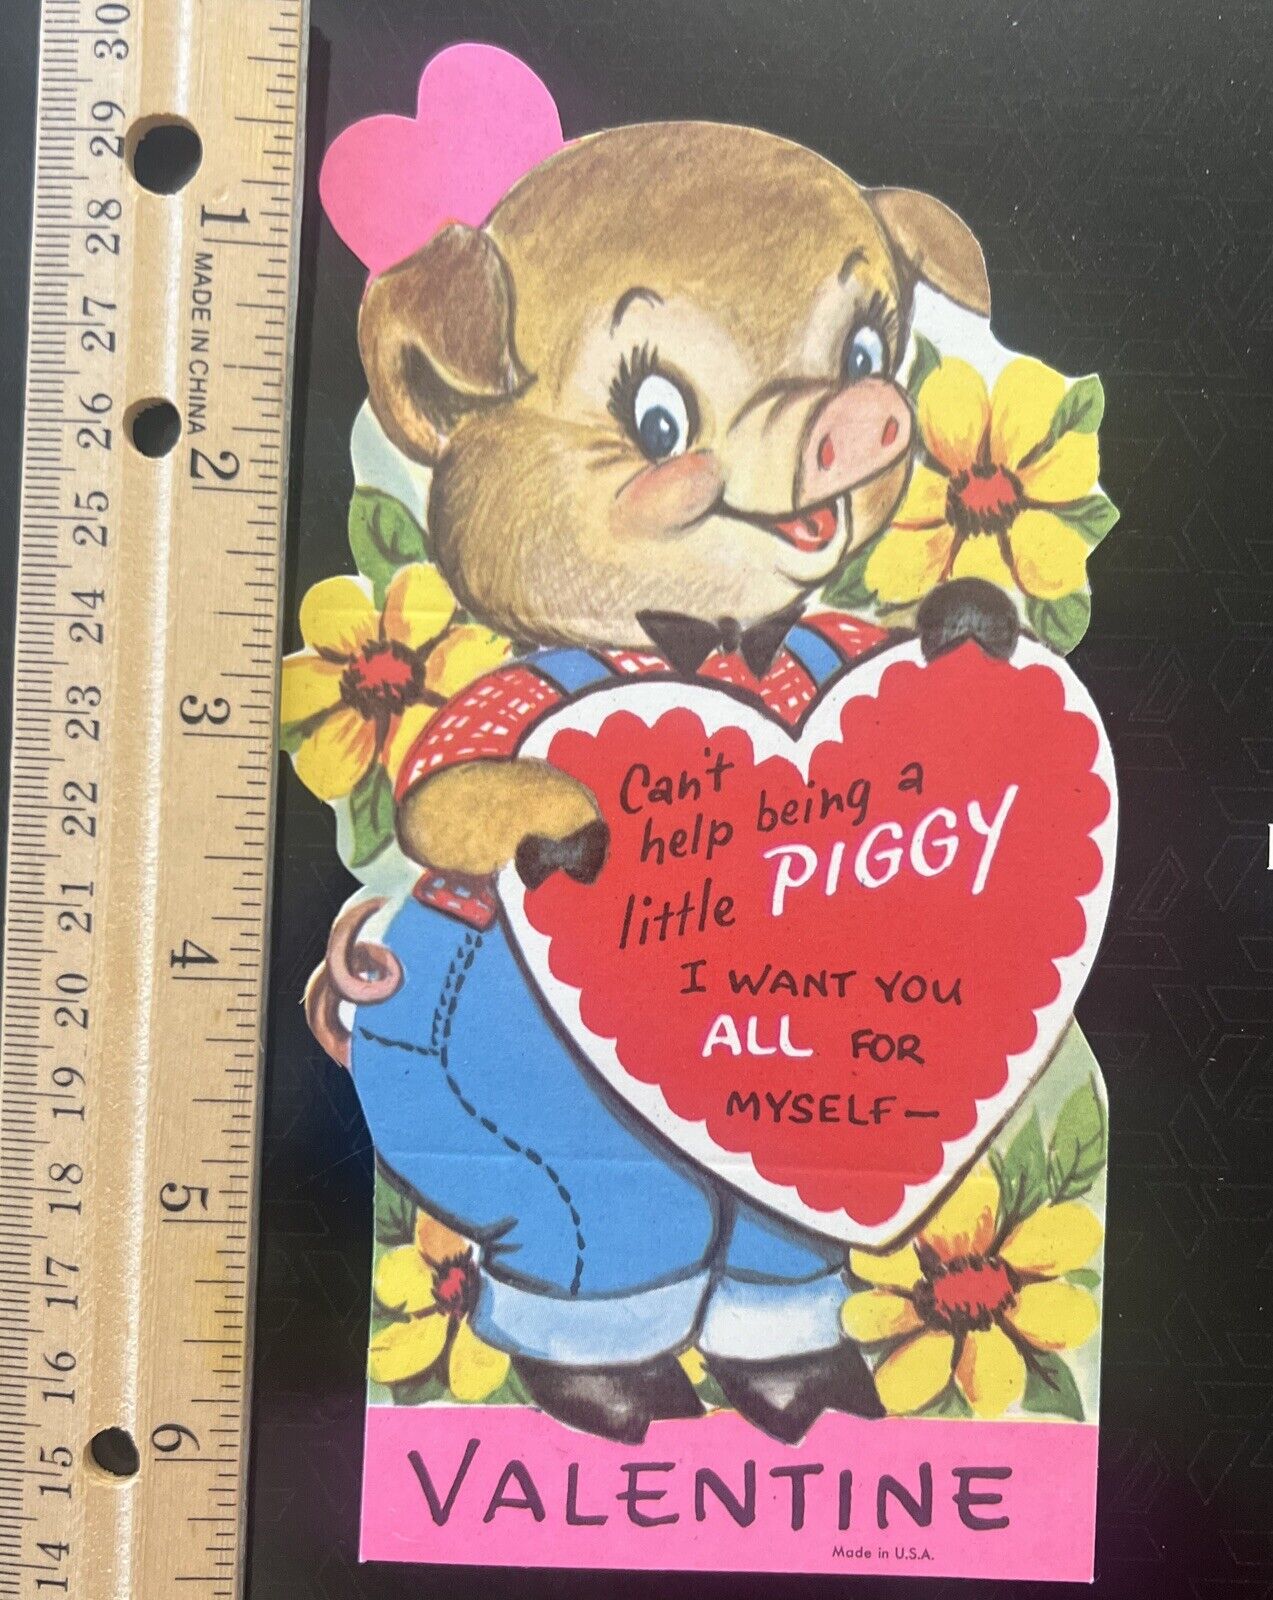 Vintage Kids Valentine\'s Day Card “Cant Help Being A Little Piggy”